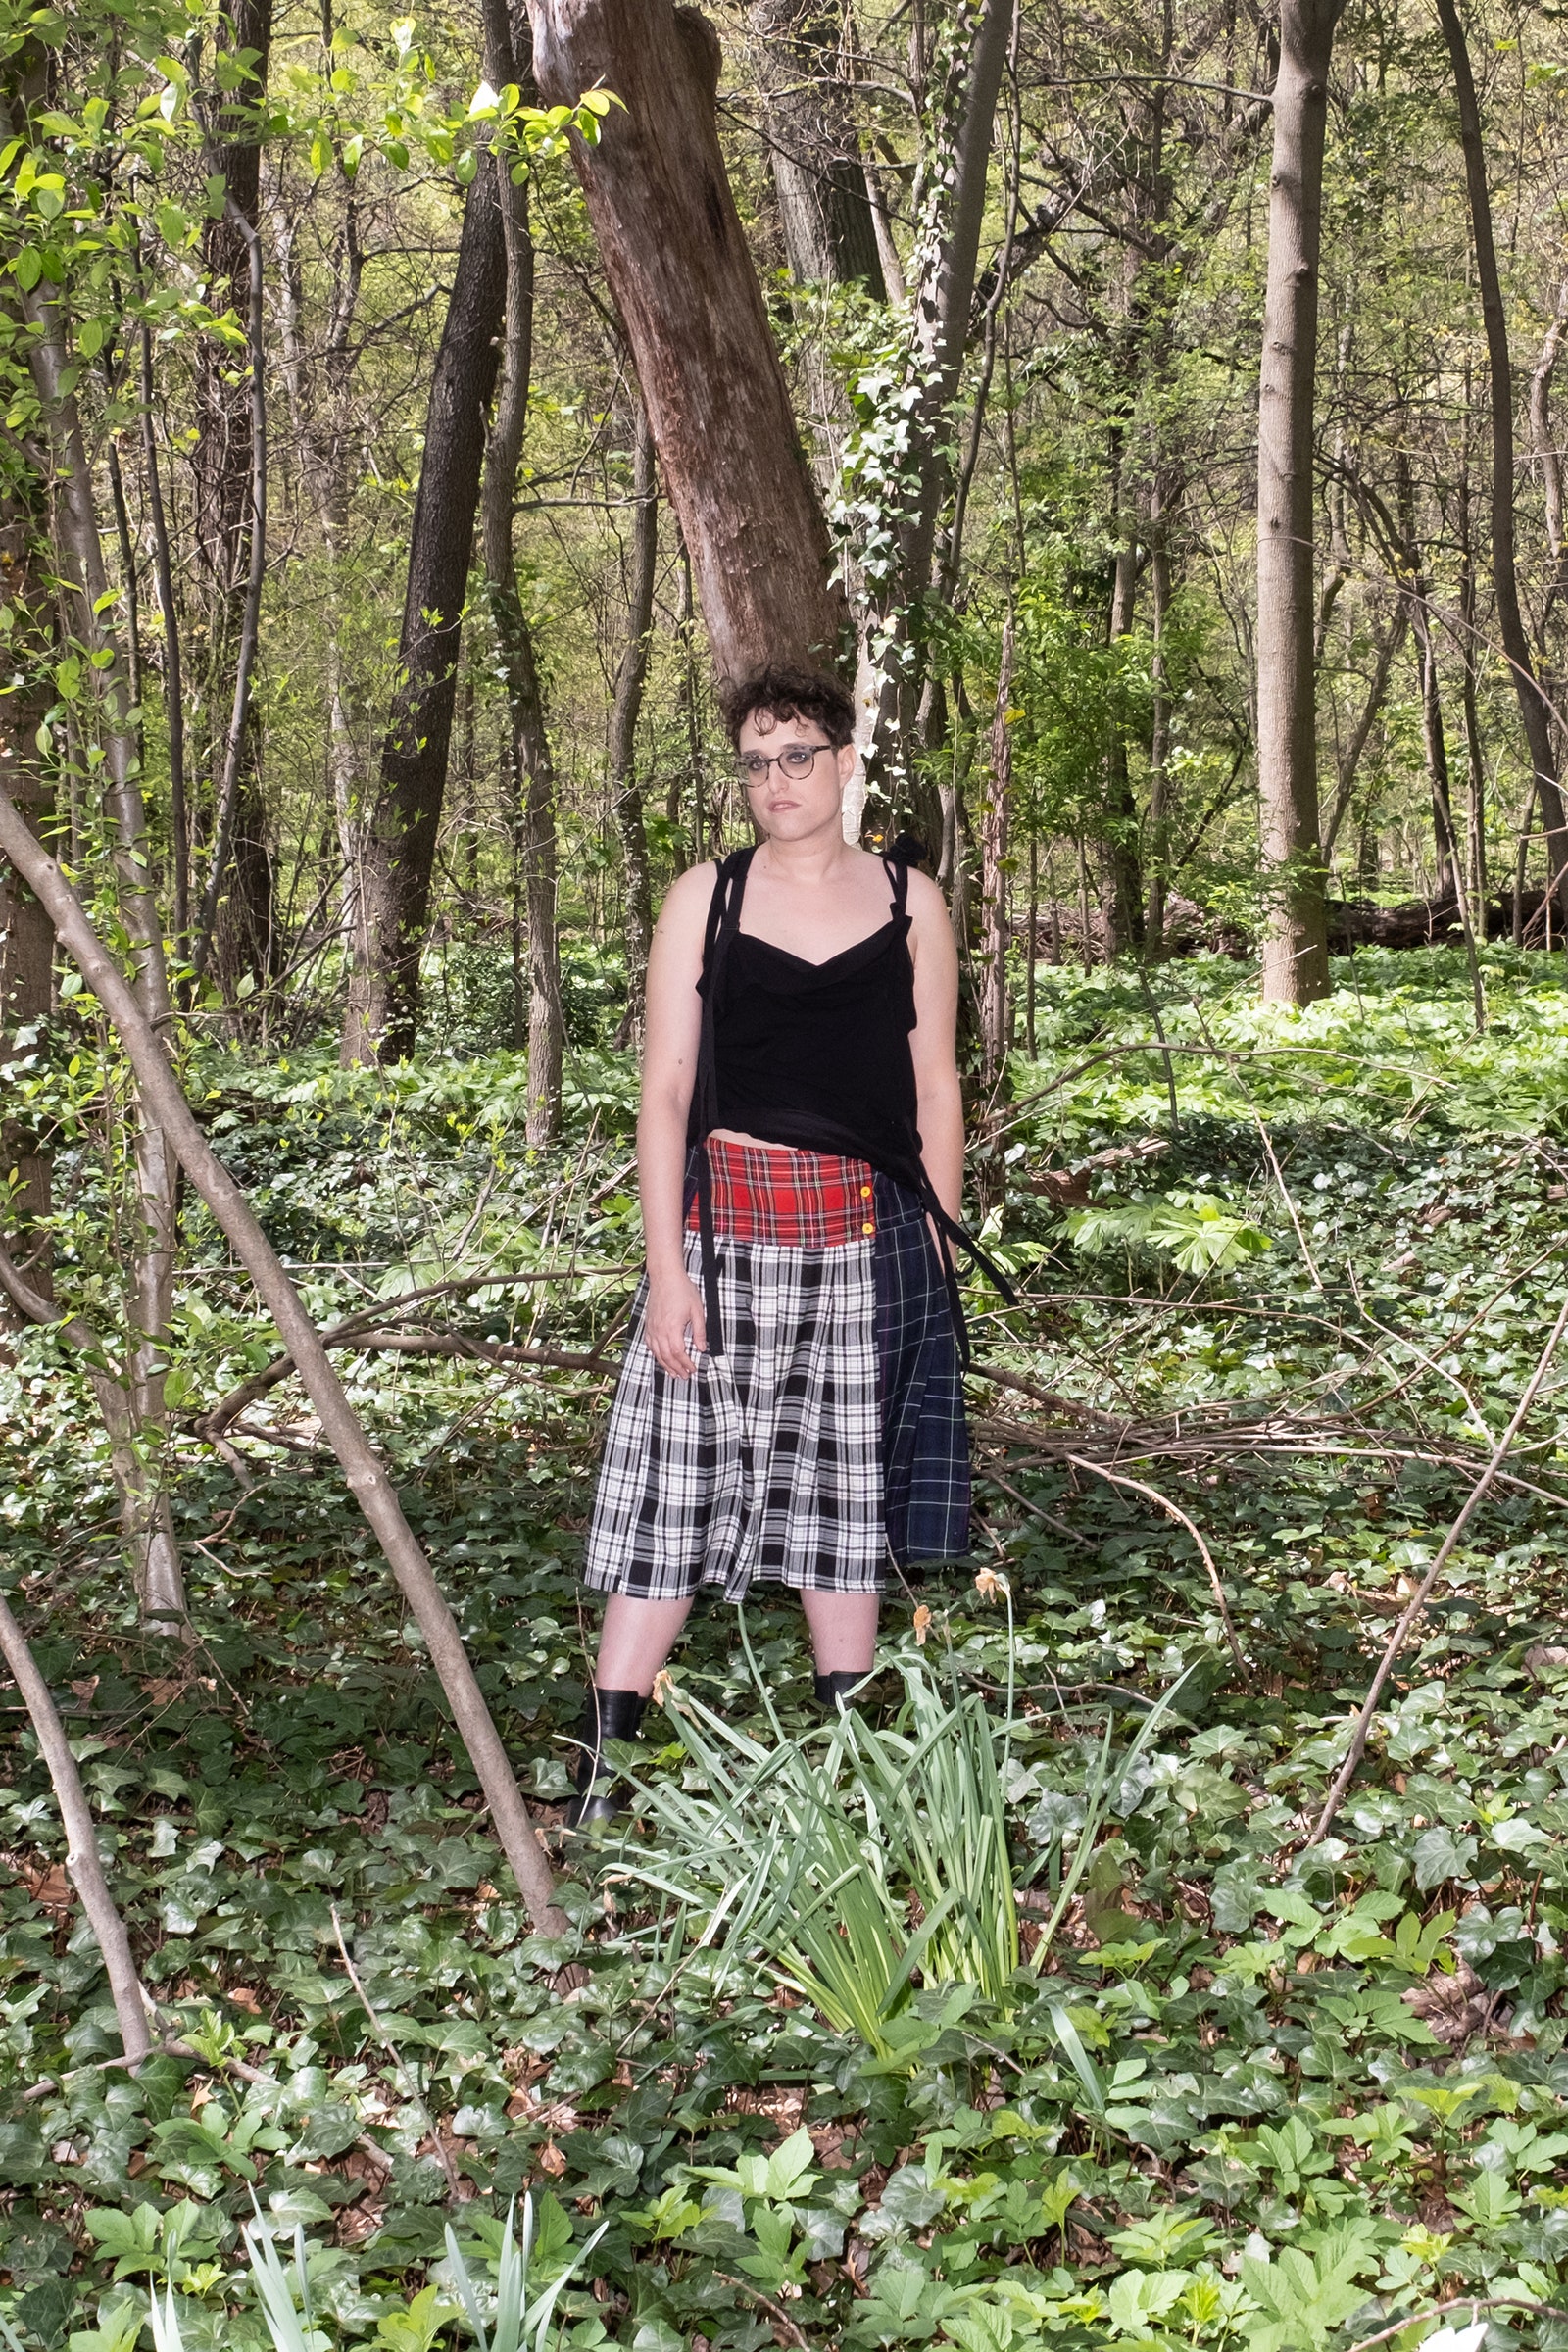 Jane Schoenbrun standing in a wooded area in Prospect Park Brooklyn. They wear a plaid skirt and black tank top.